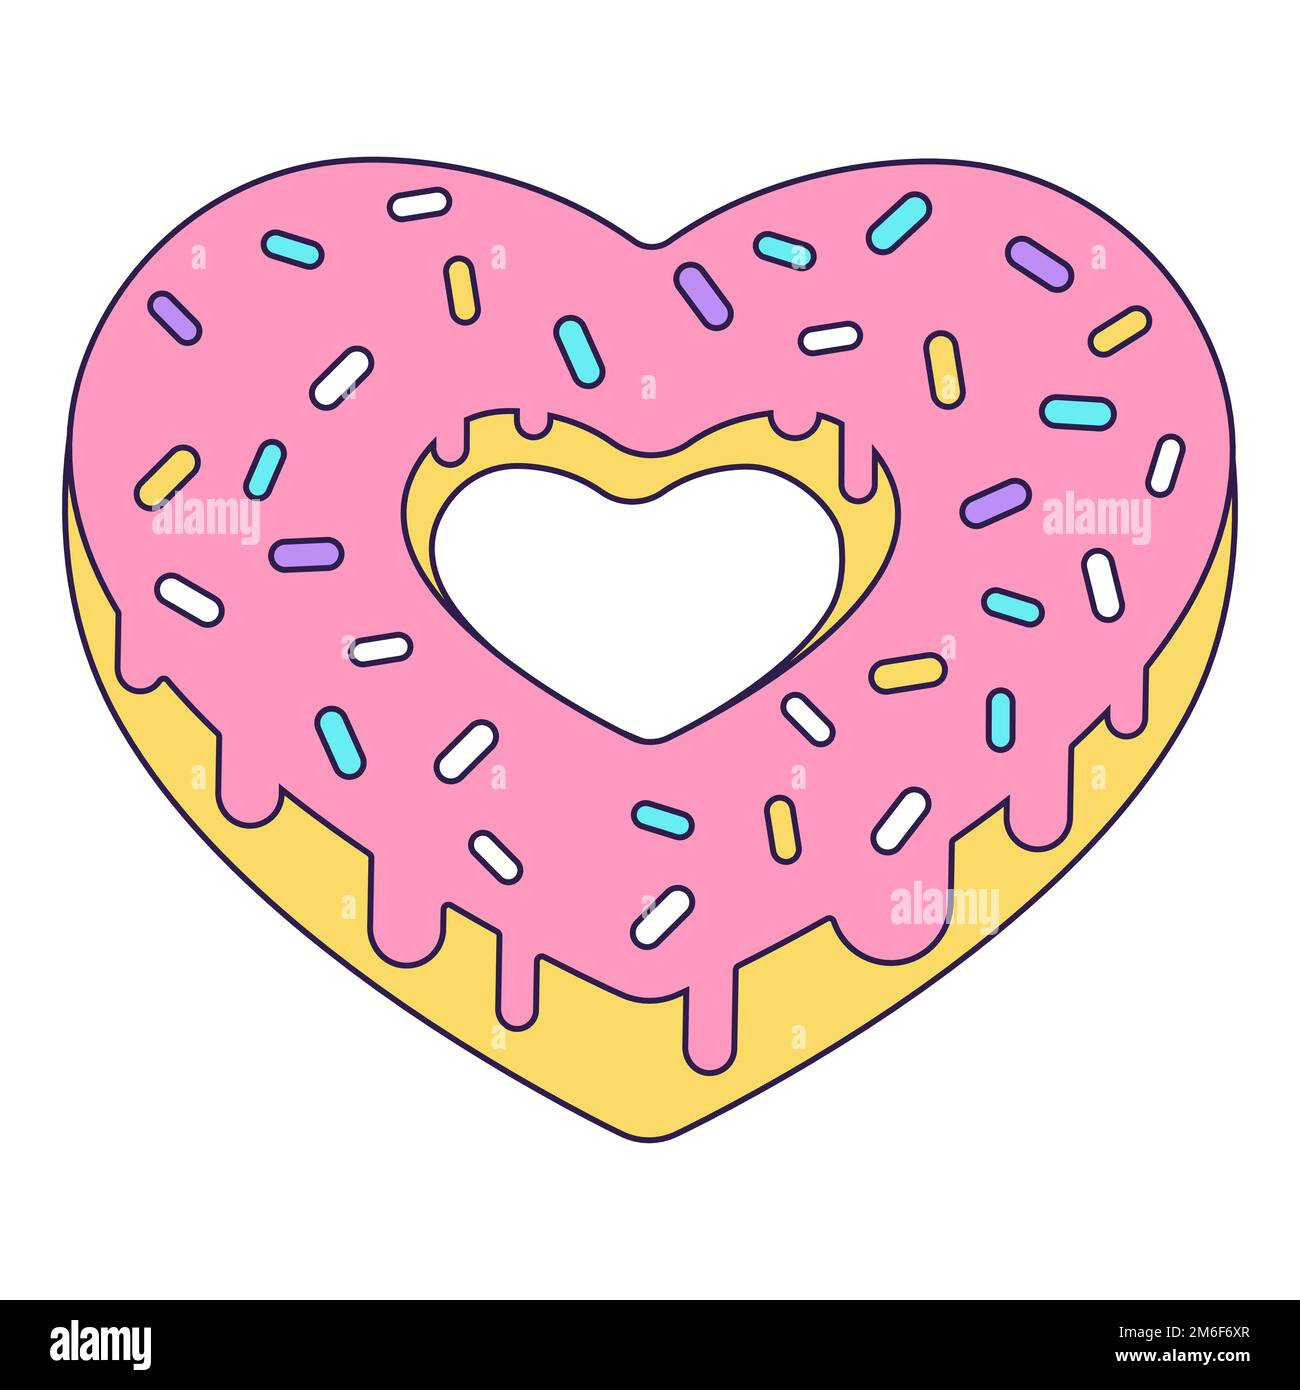 Cartoon Valentine Day icon donut heart of heart shape. Love symbol in the fashionable line art style. The sweet chocolate hearts are soft pink, red Stock Vector